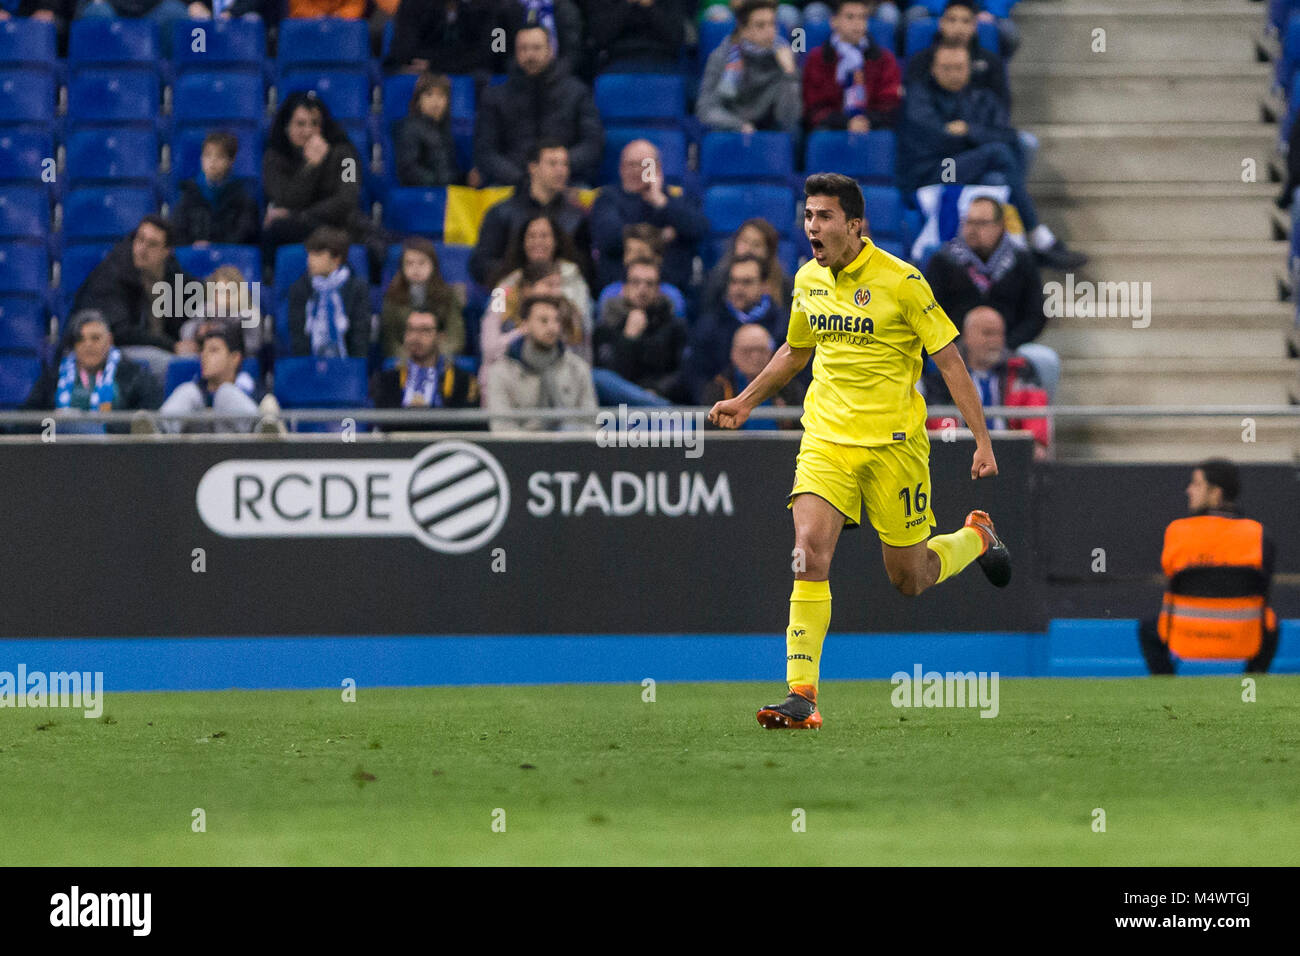 Barcelona, Spain. 18th Feb, 2018. Villarreal midfielder Rodrigo (16) celebrates scoring the goal during the match between RCD Espanyol and Villarreal, for the round 24 of the Liga Santander, played at RCDE Stadium on 18th February 2018 in Barcelona, Spain. Credit: Gtres Información más Comuniación on line, S.L./Alamy Live News Stock Photo